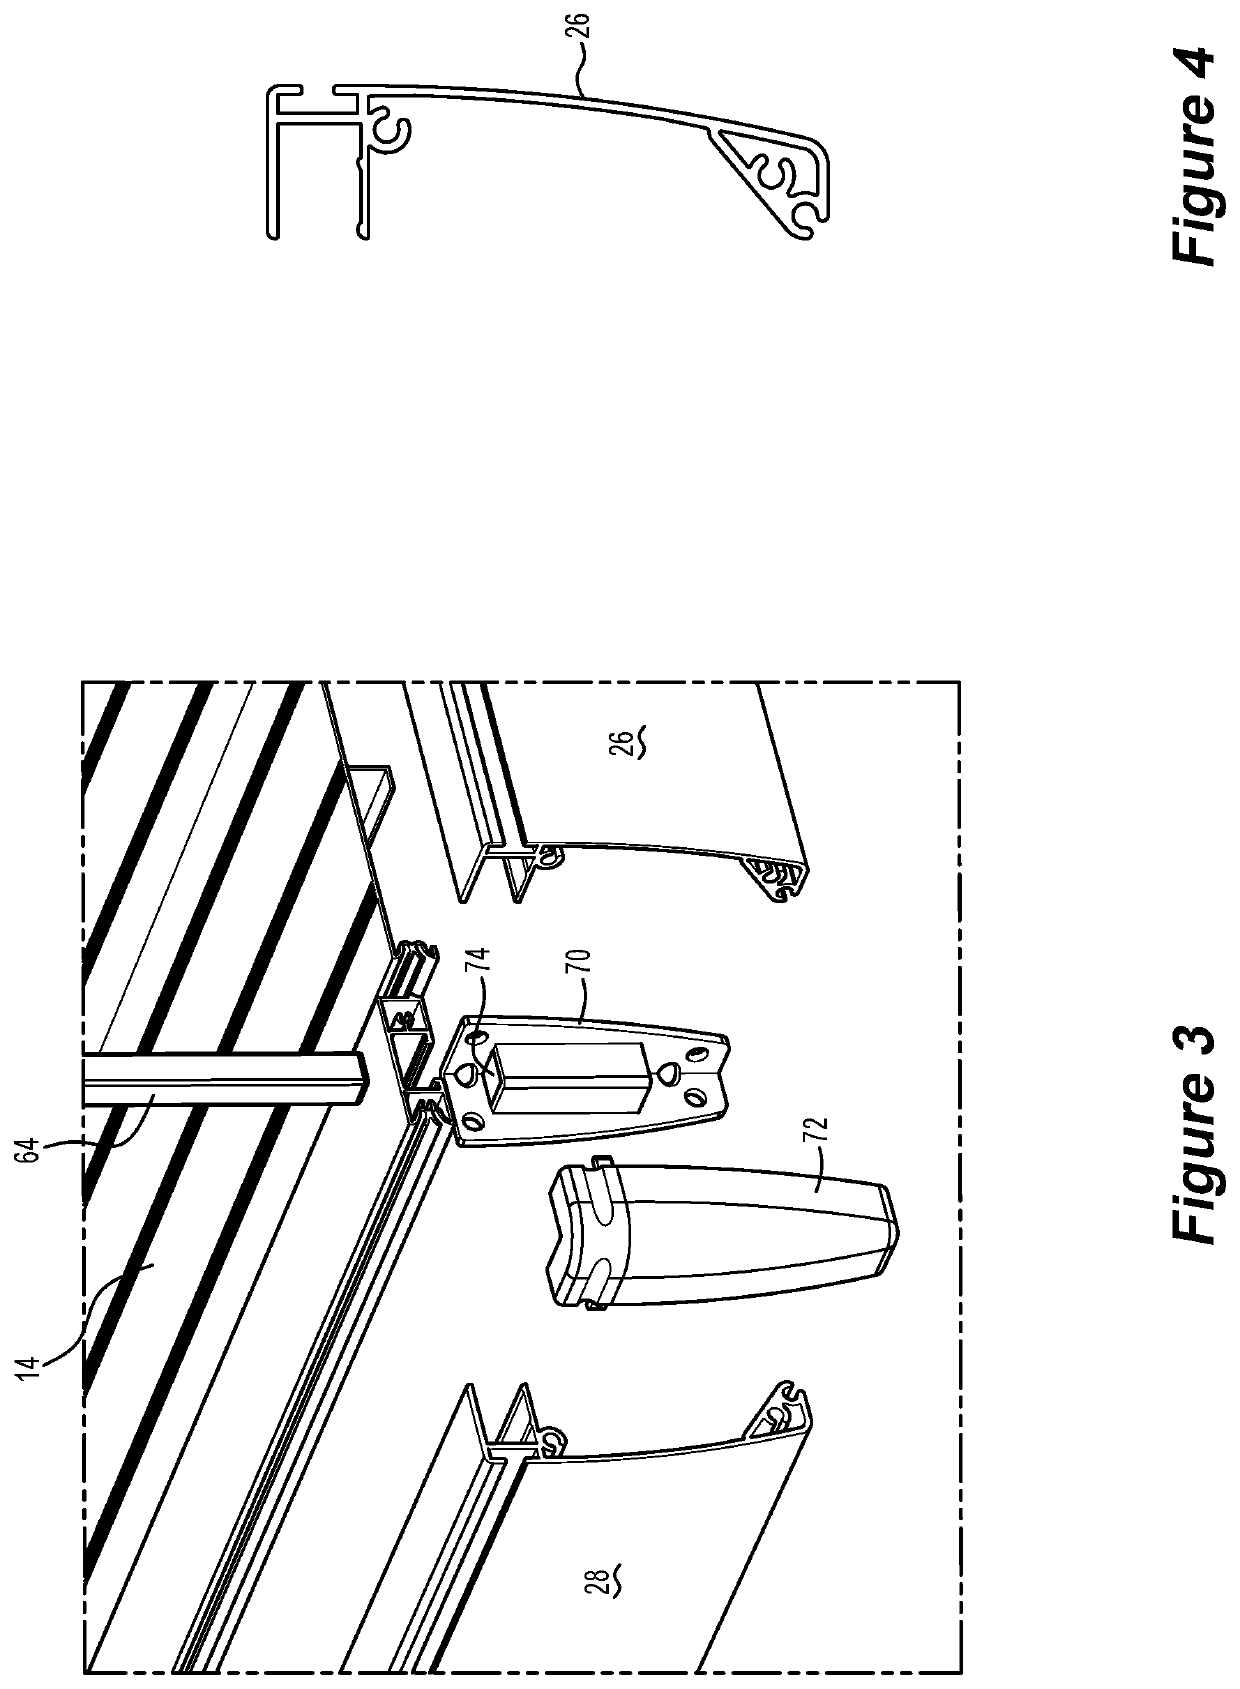 Utility vehicle corner module with gate securing apparatus